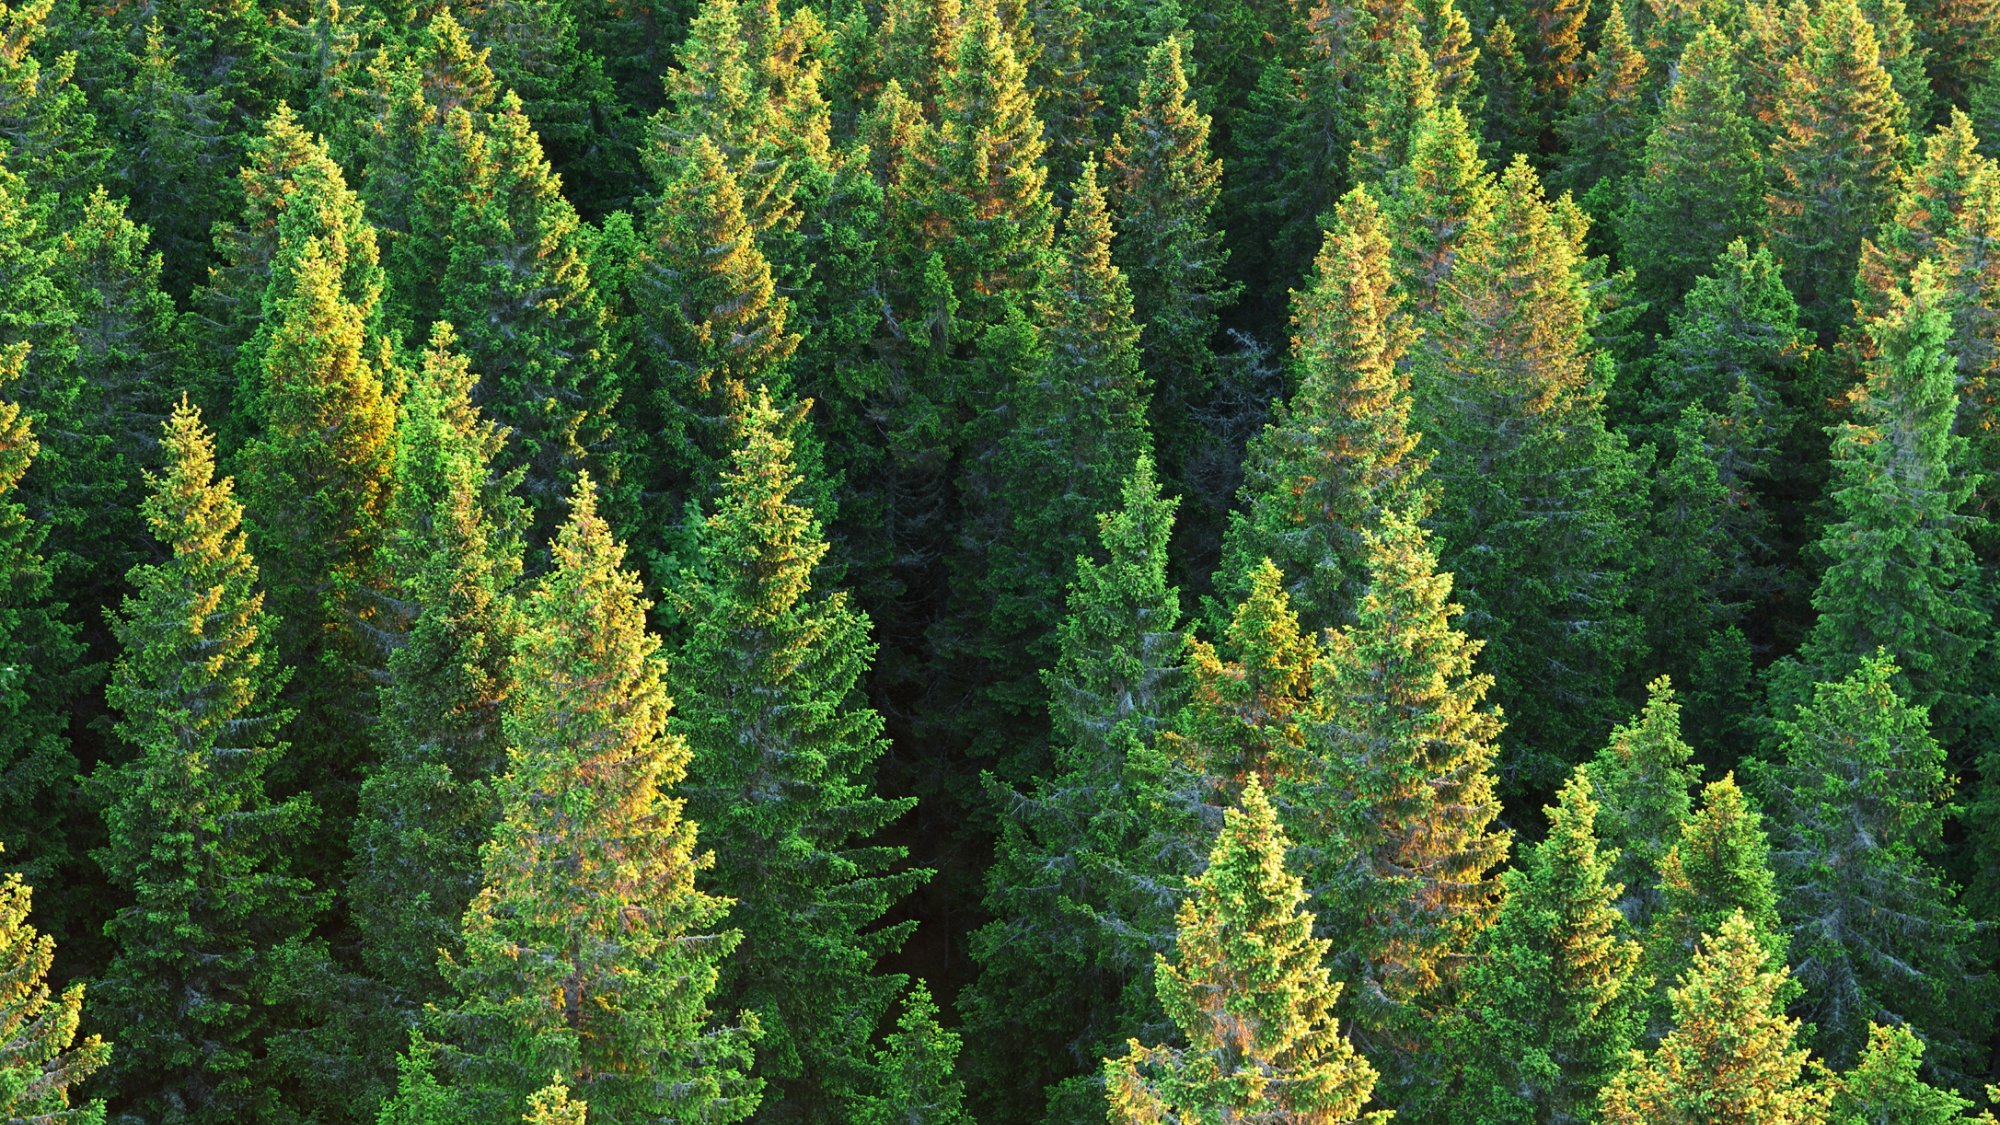 Spruce forest at sunrise. Top of the trees brightened by early morning sunlight.